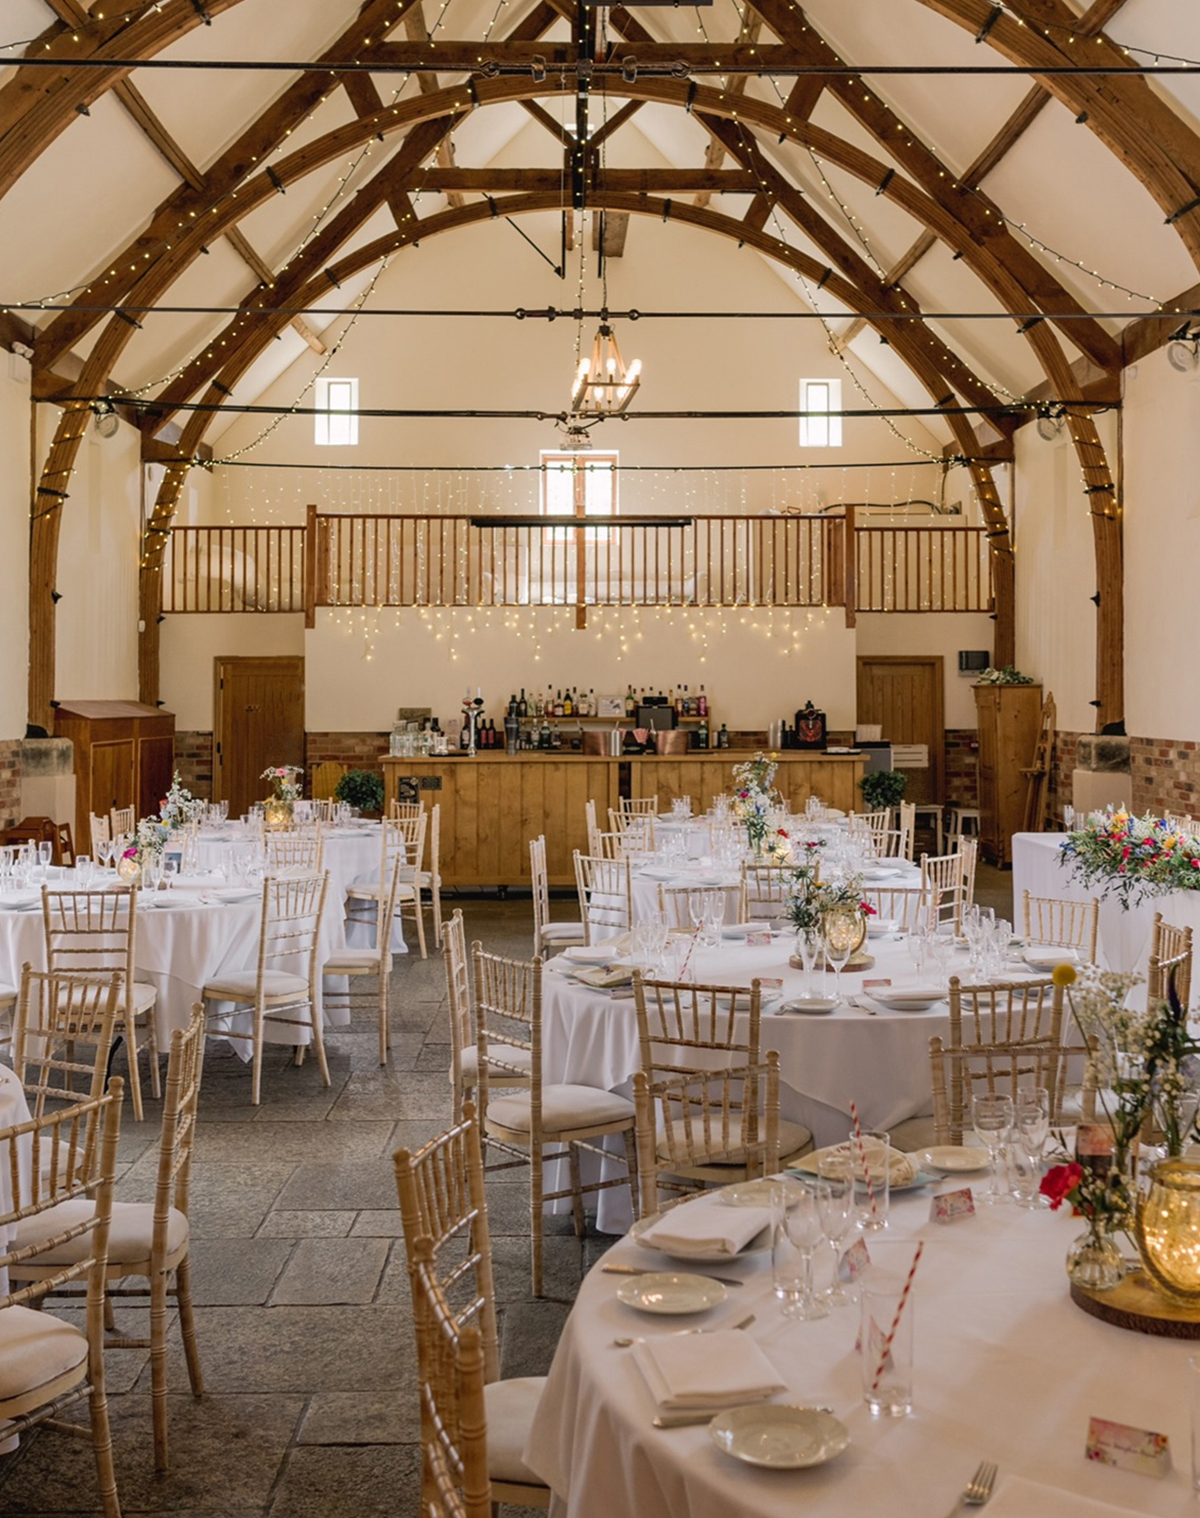 Wedding in West Sussex Countryside